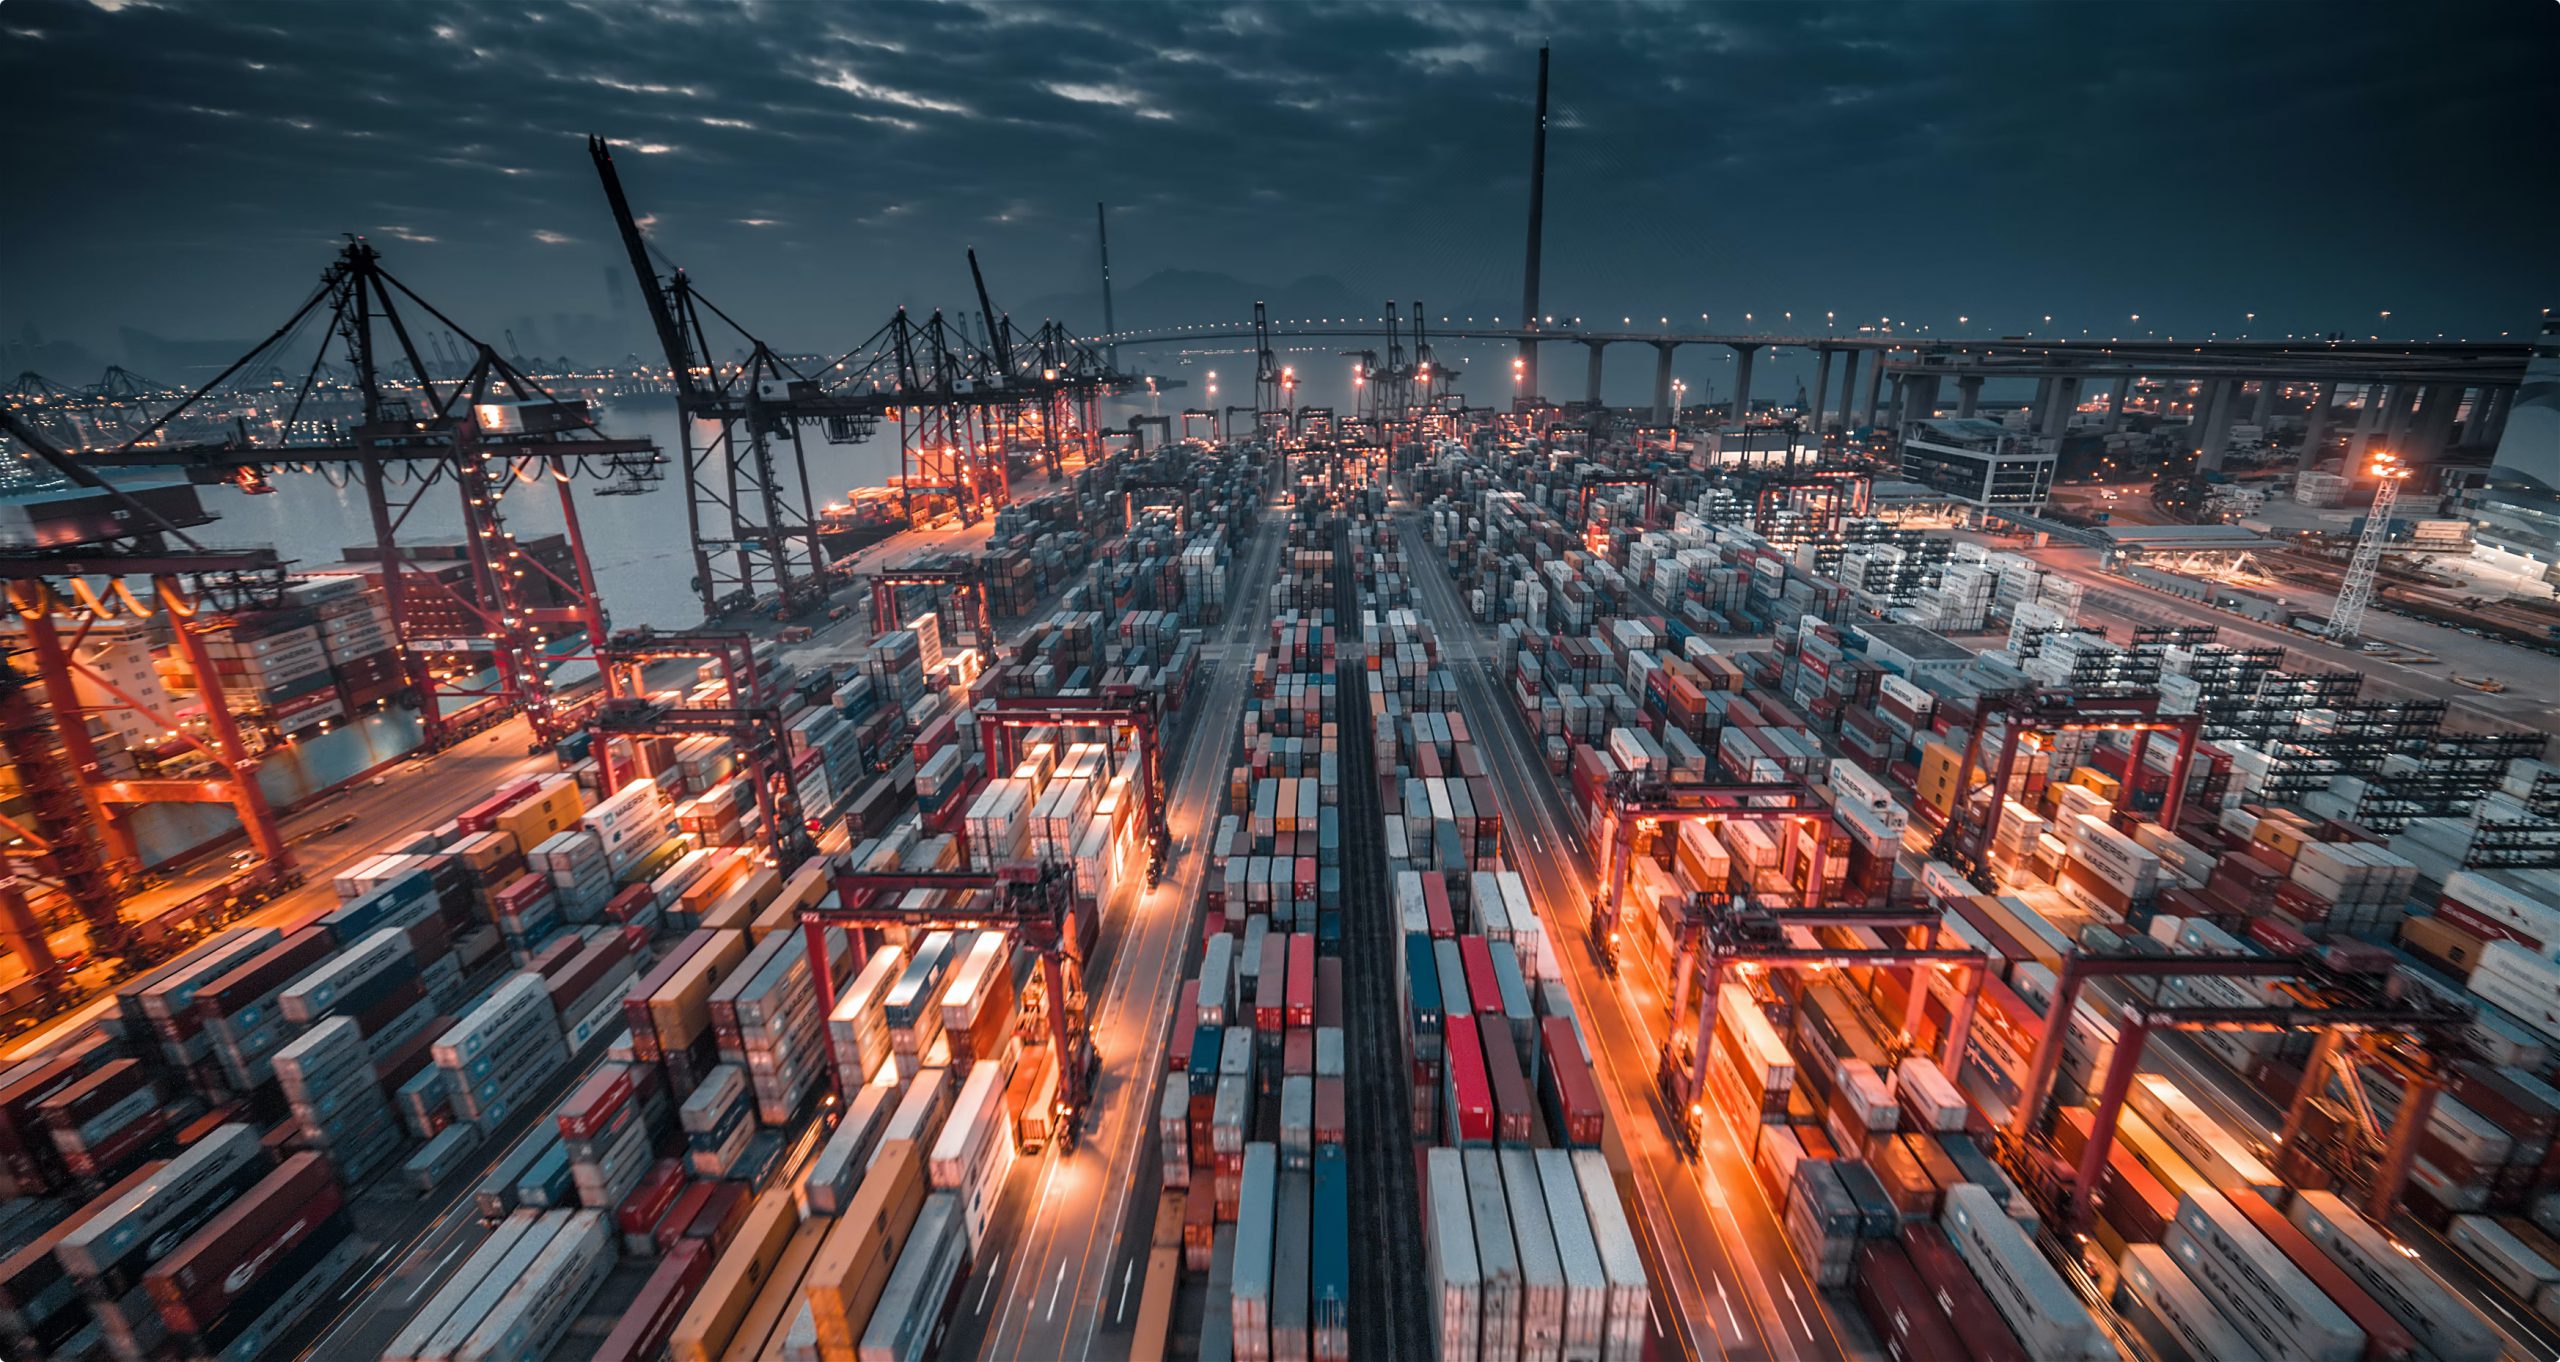 overview of shipping containers at a port at night